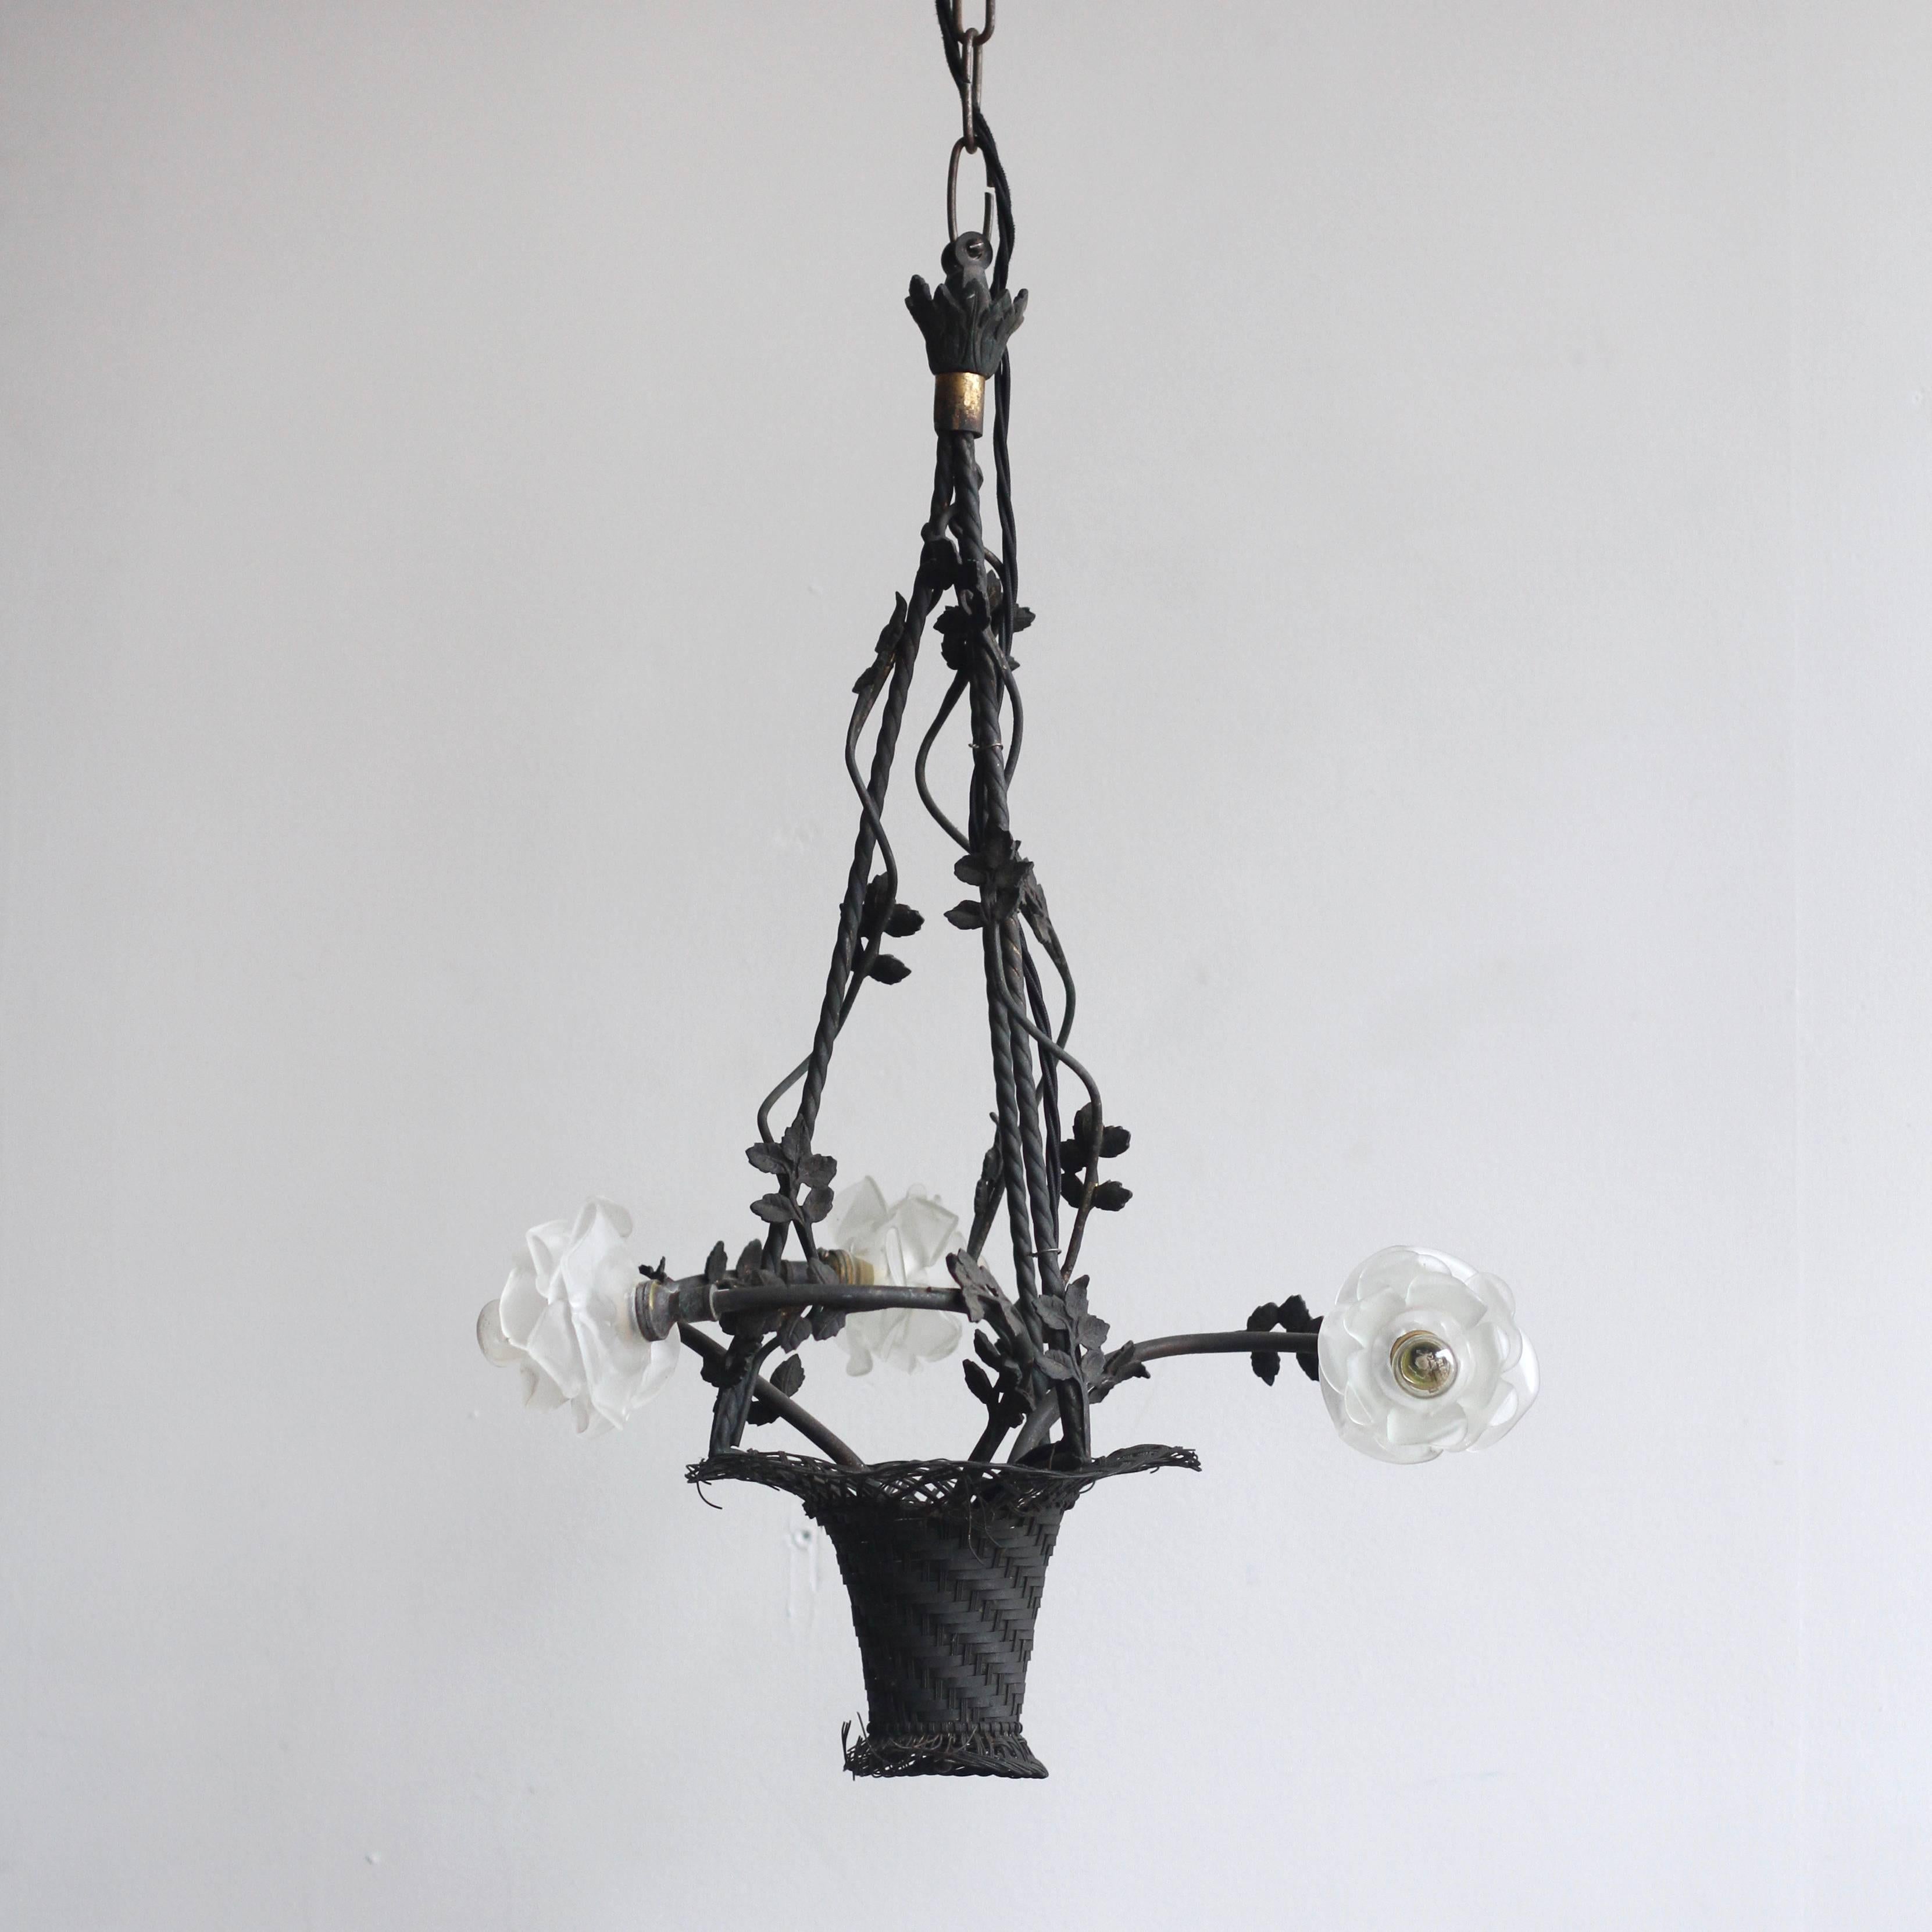 French early 1900s handmade wrought iron floral basket chandelier with original frosted floral glass shades. The iron work is decorative and ornate. It has been sympathetically restored to retain the beautiful patina that has developed over time